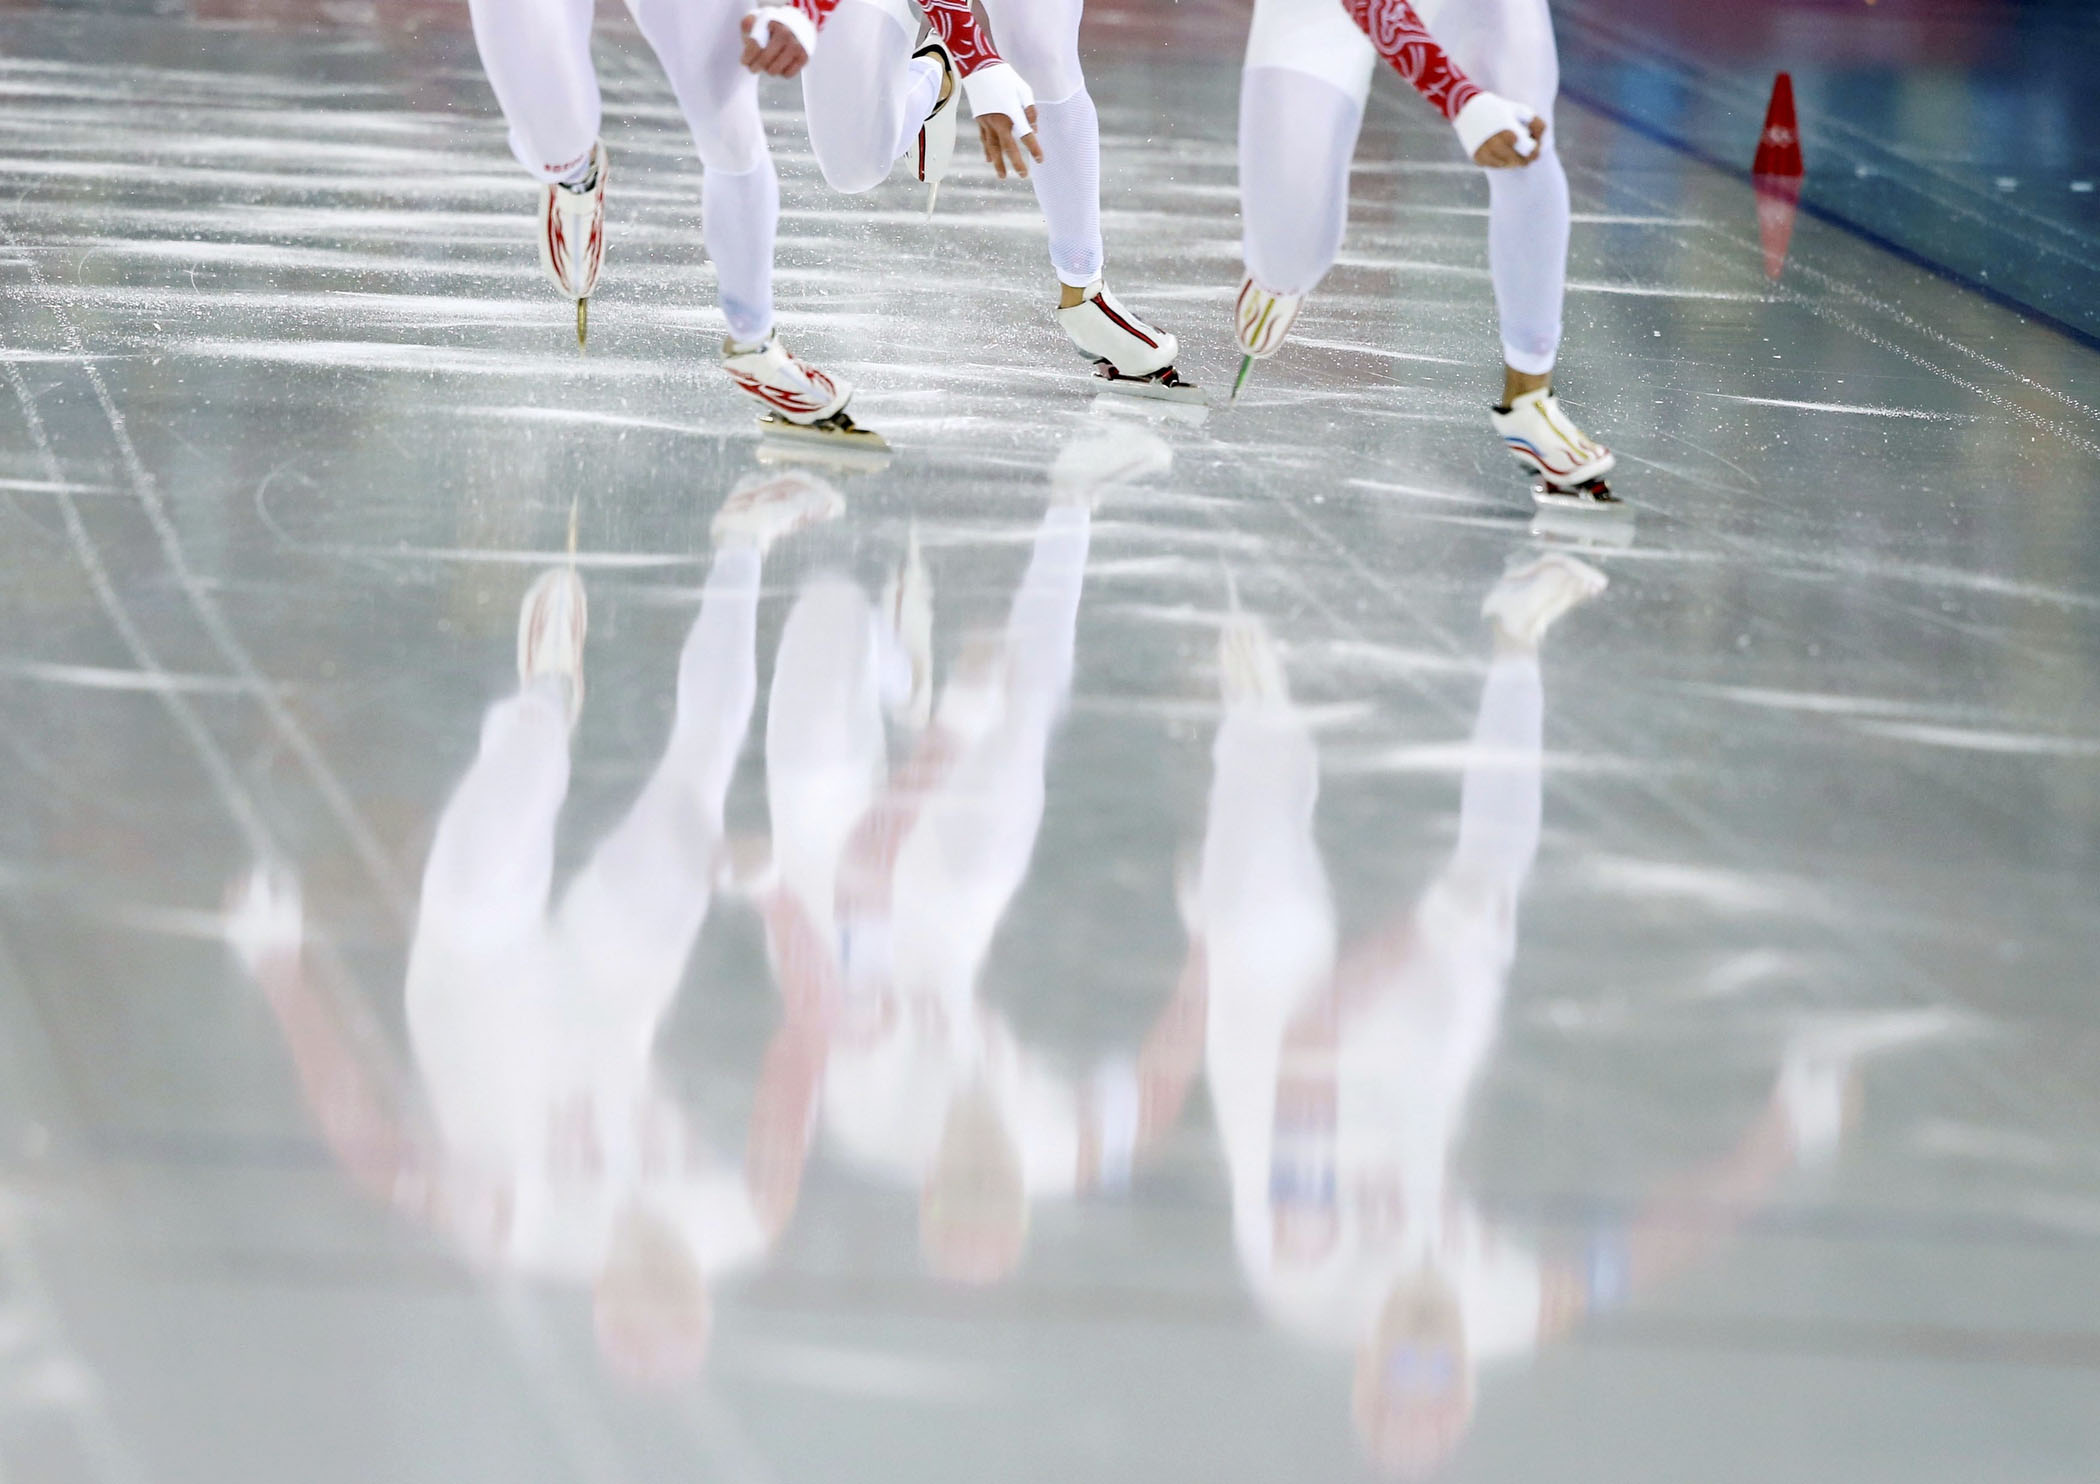 Russia's skaters start during their men's speed skating team pursuit quarter-finals event.